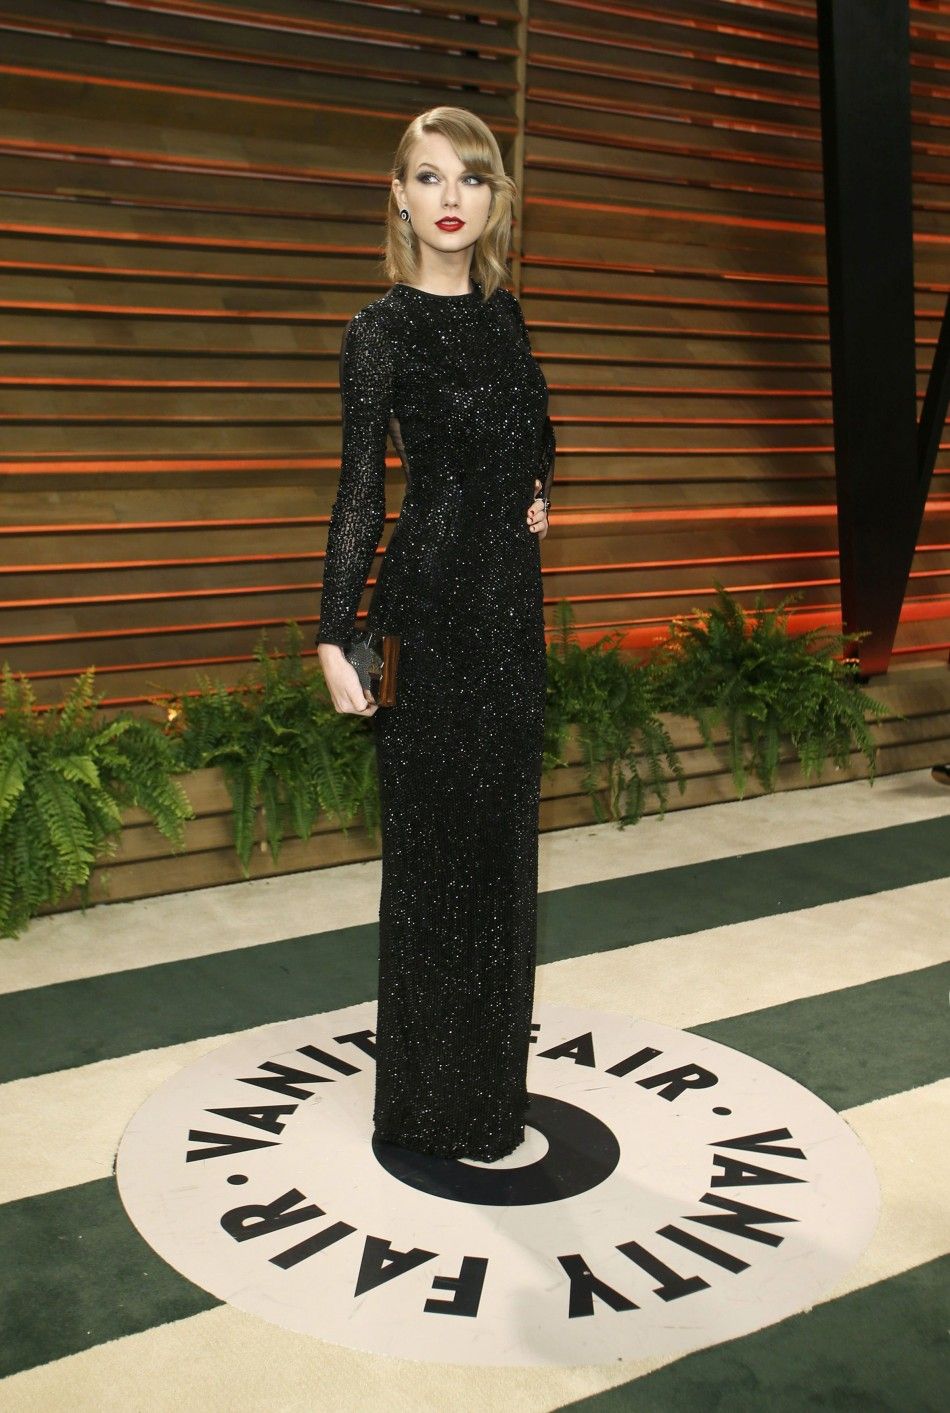 Musician Taylor Swift arrives at the 2014 Vanity Fair Oscars Party in West Hollywood